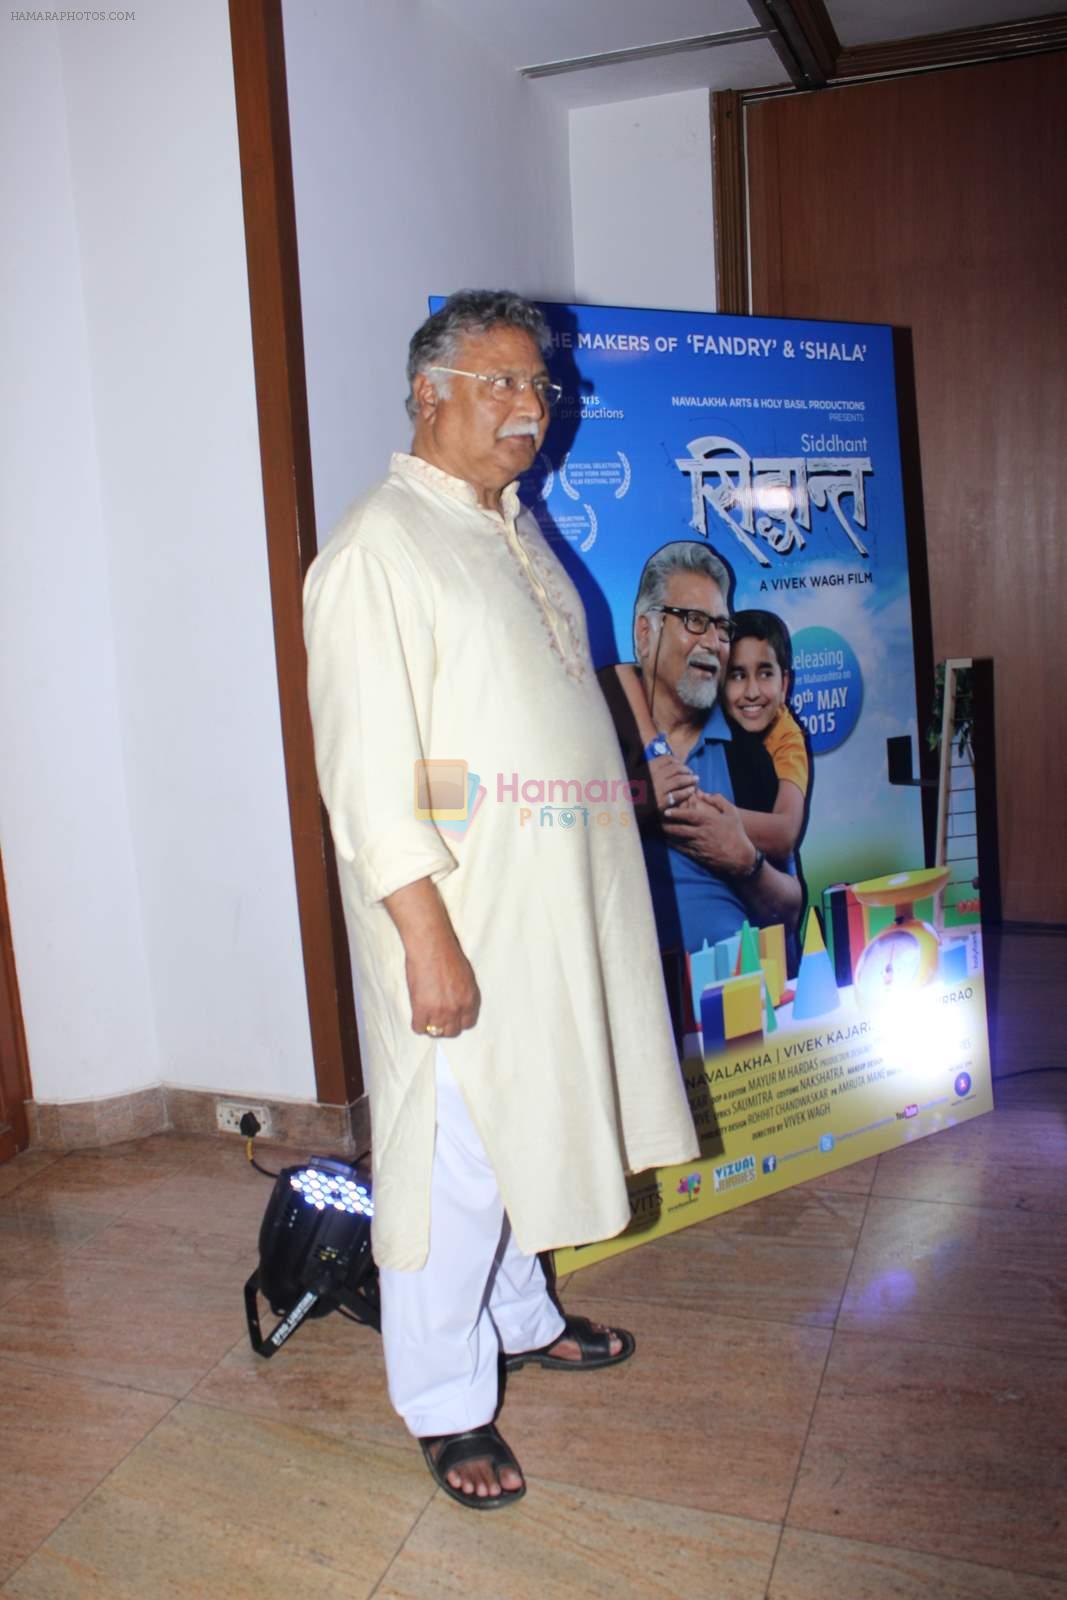 Vikram Gokhale at Marathi film Siddhant music launch in The Club on 27th April 2015